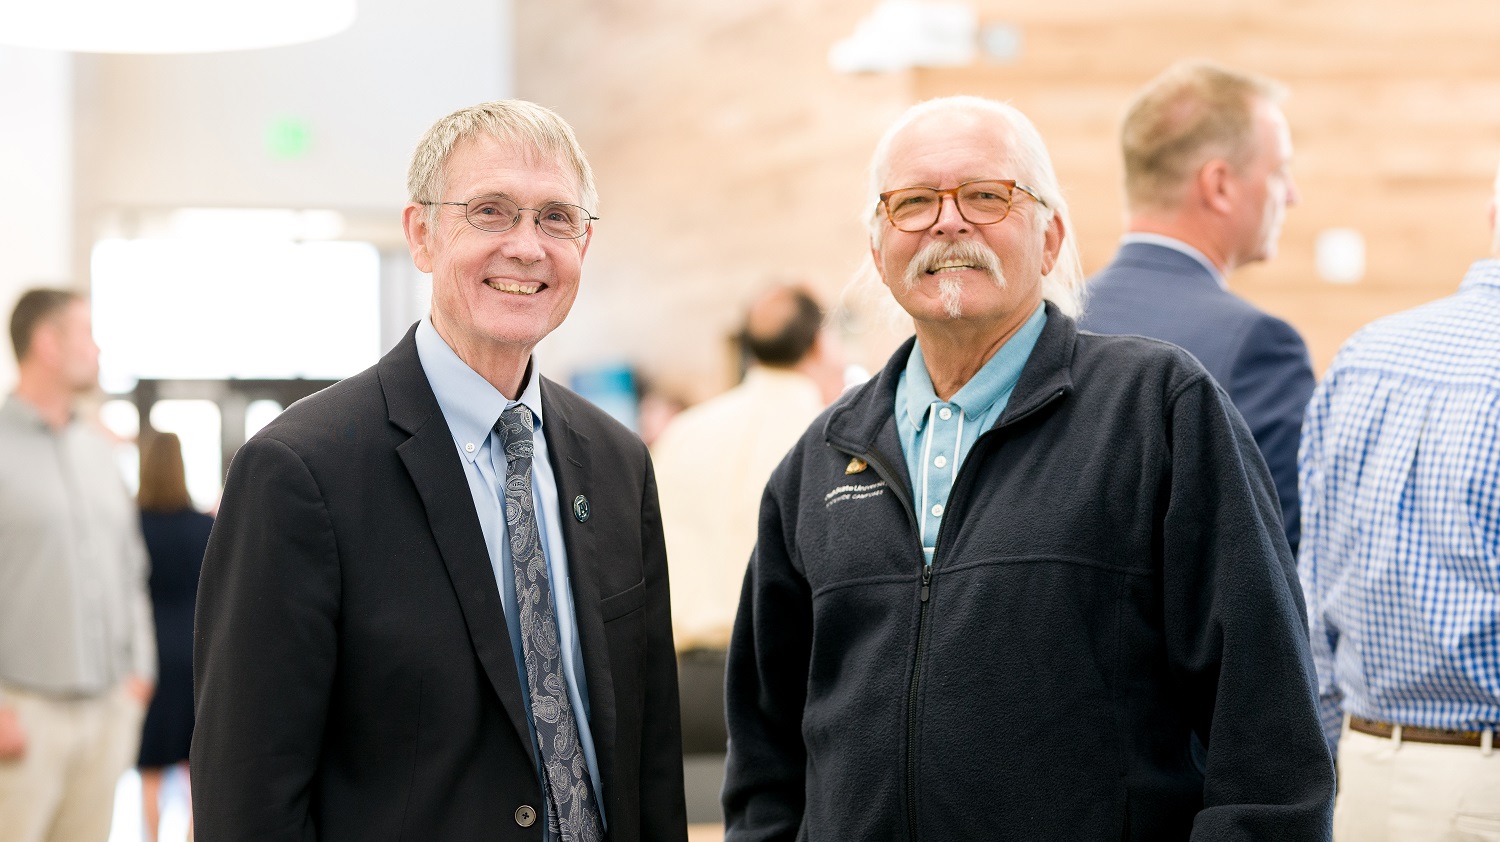 Executive Vice President and Provost Frank Galey and Vice Provost for Statewide Campuses RIchard C. Etchberger pose for a picture at the Moab Campus ribbon cutting event.